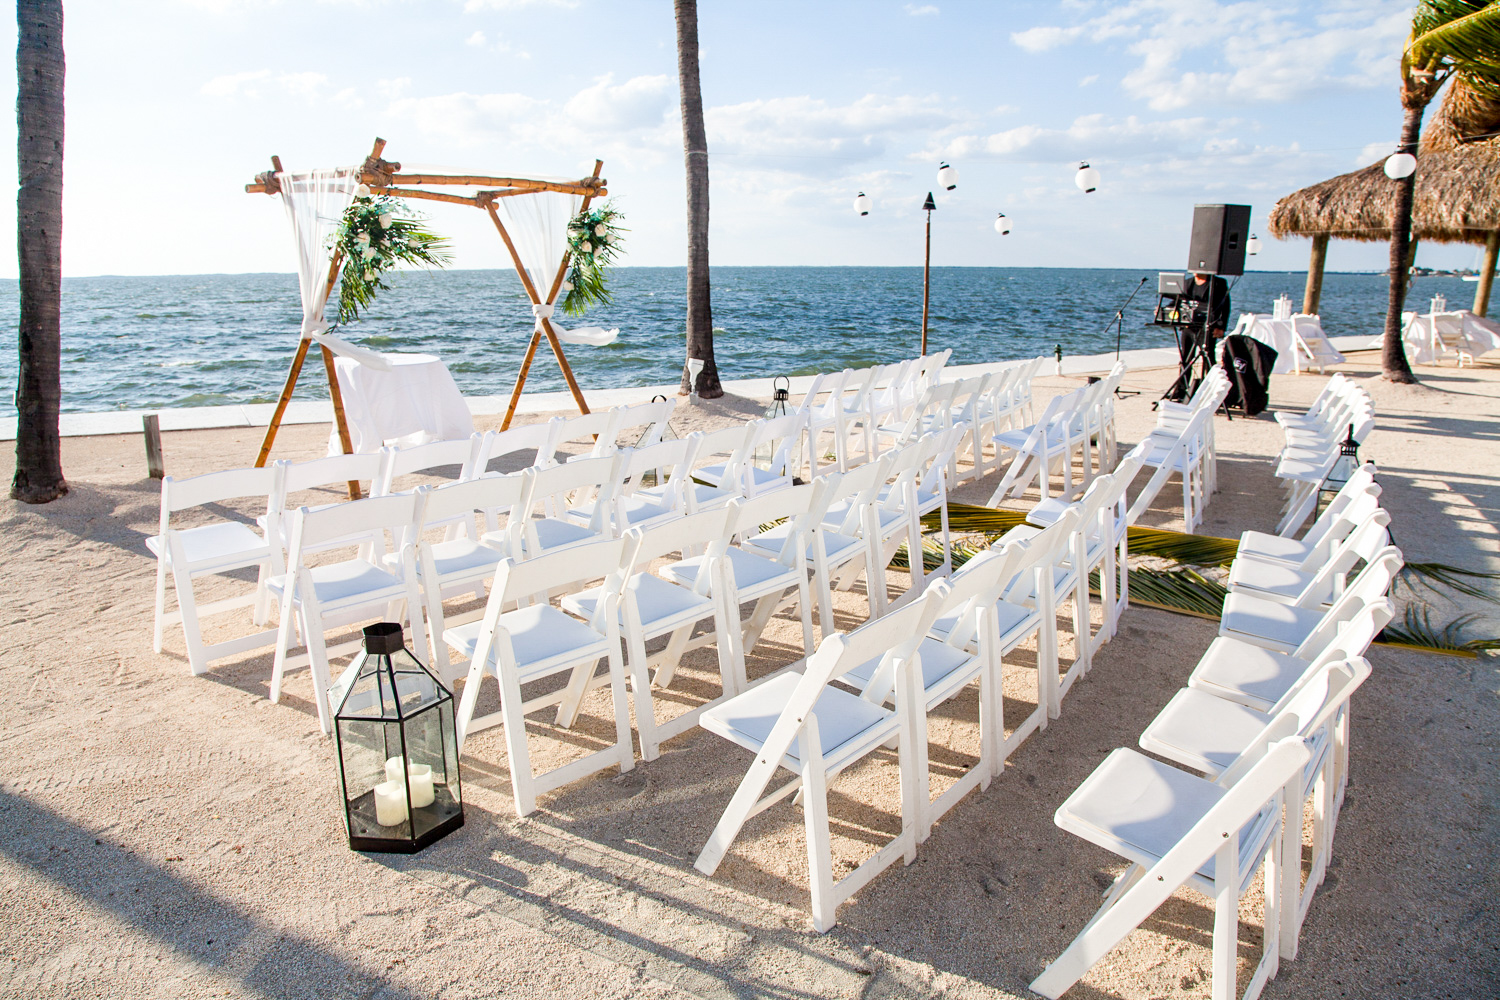 A beautifully decorated altar in an outdoor beach themed wedding ceremony